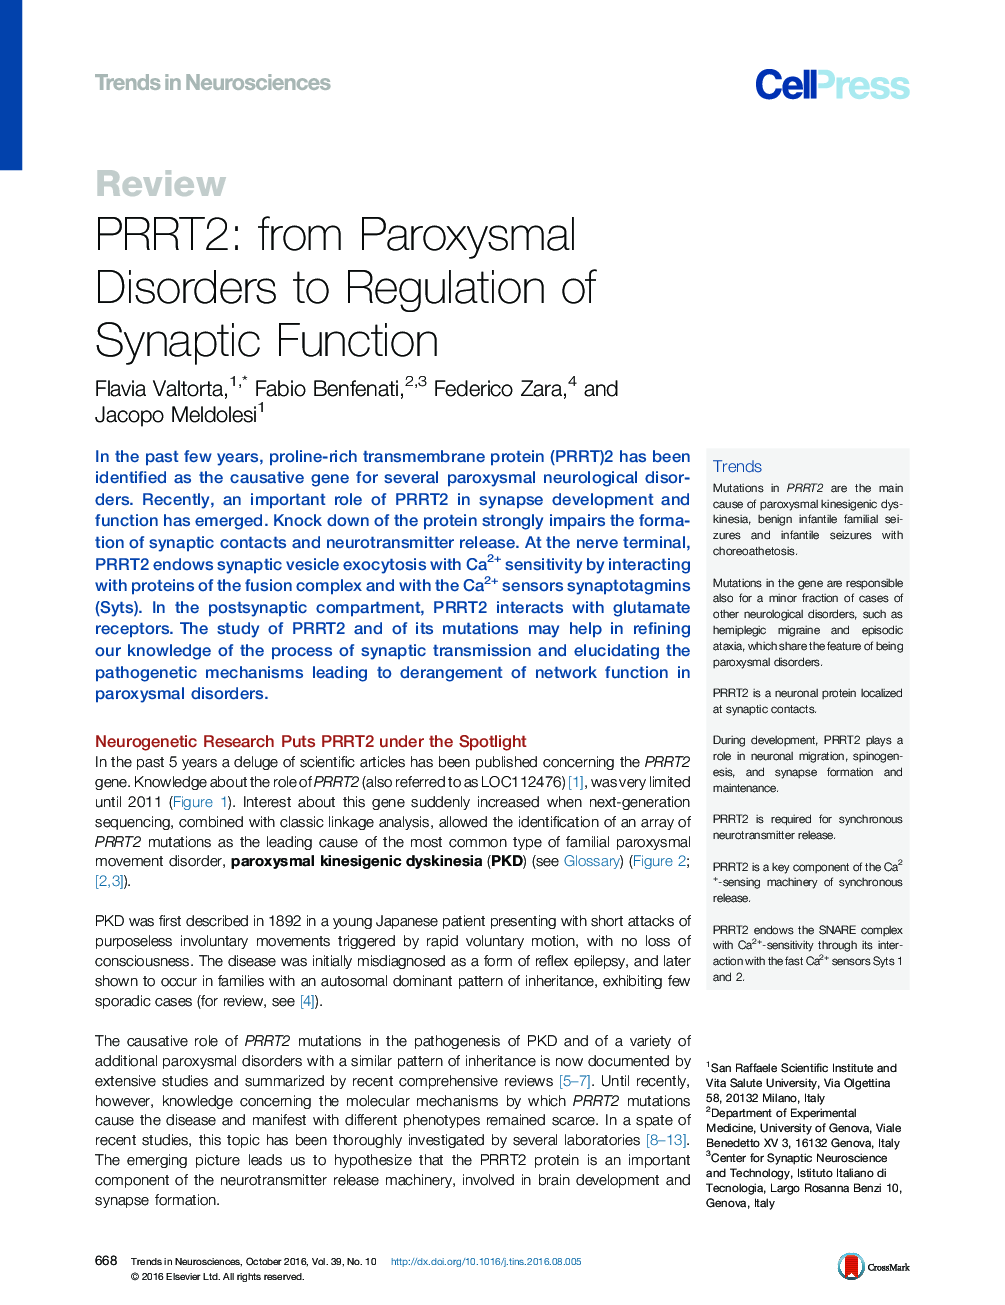 PRRT2: from Paroxysmal Disorders to Regulation of Synaptic Function